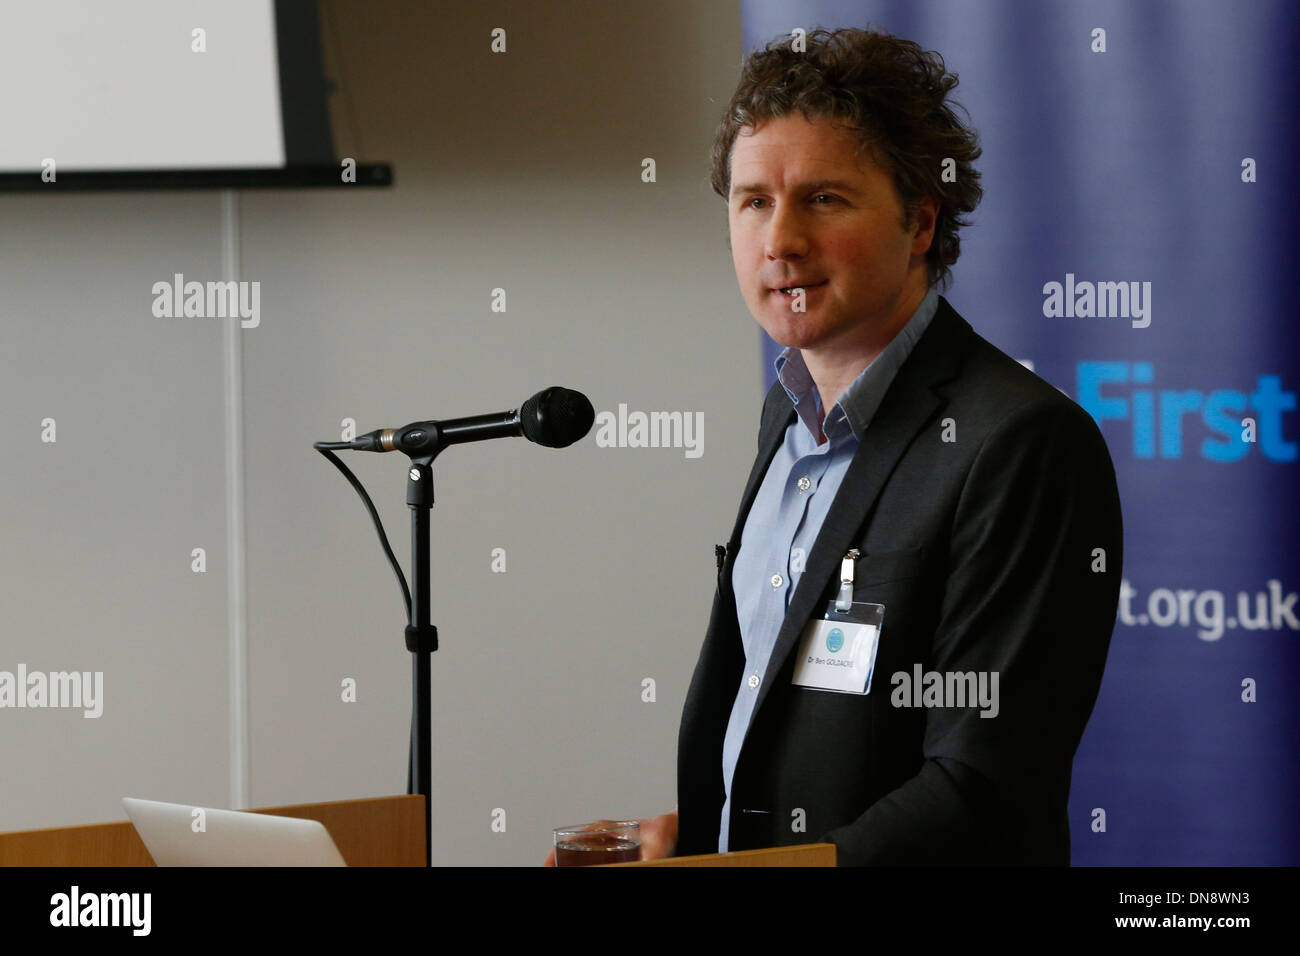 Dr Ben Goldacre gives a speech on building evidence into education at Bethnal Green Academy in London Britain 14 March 2013. Stock Photo